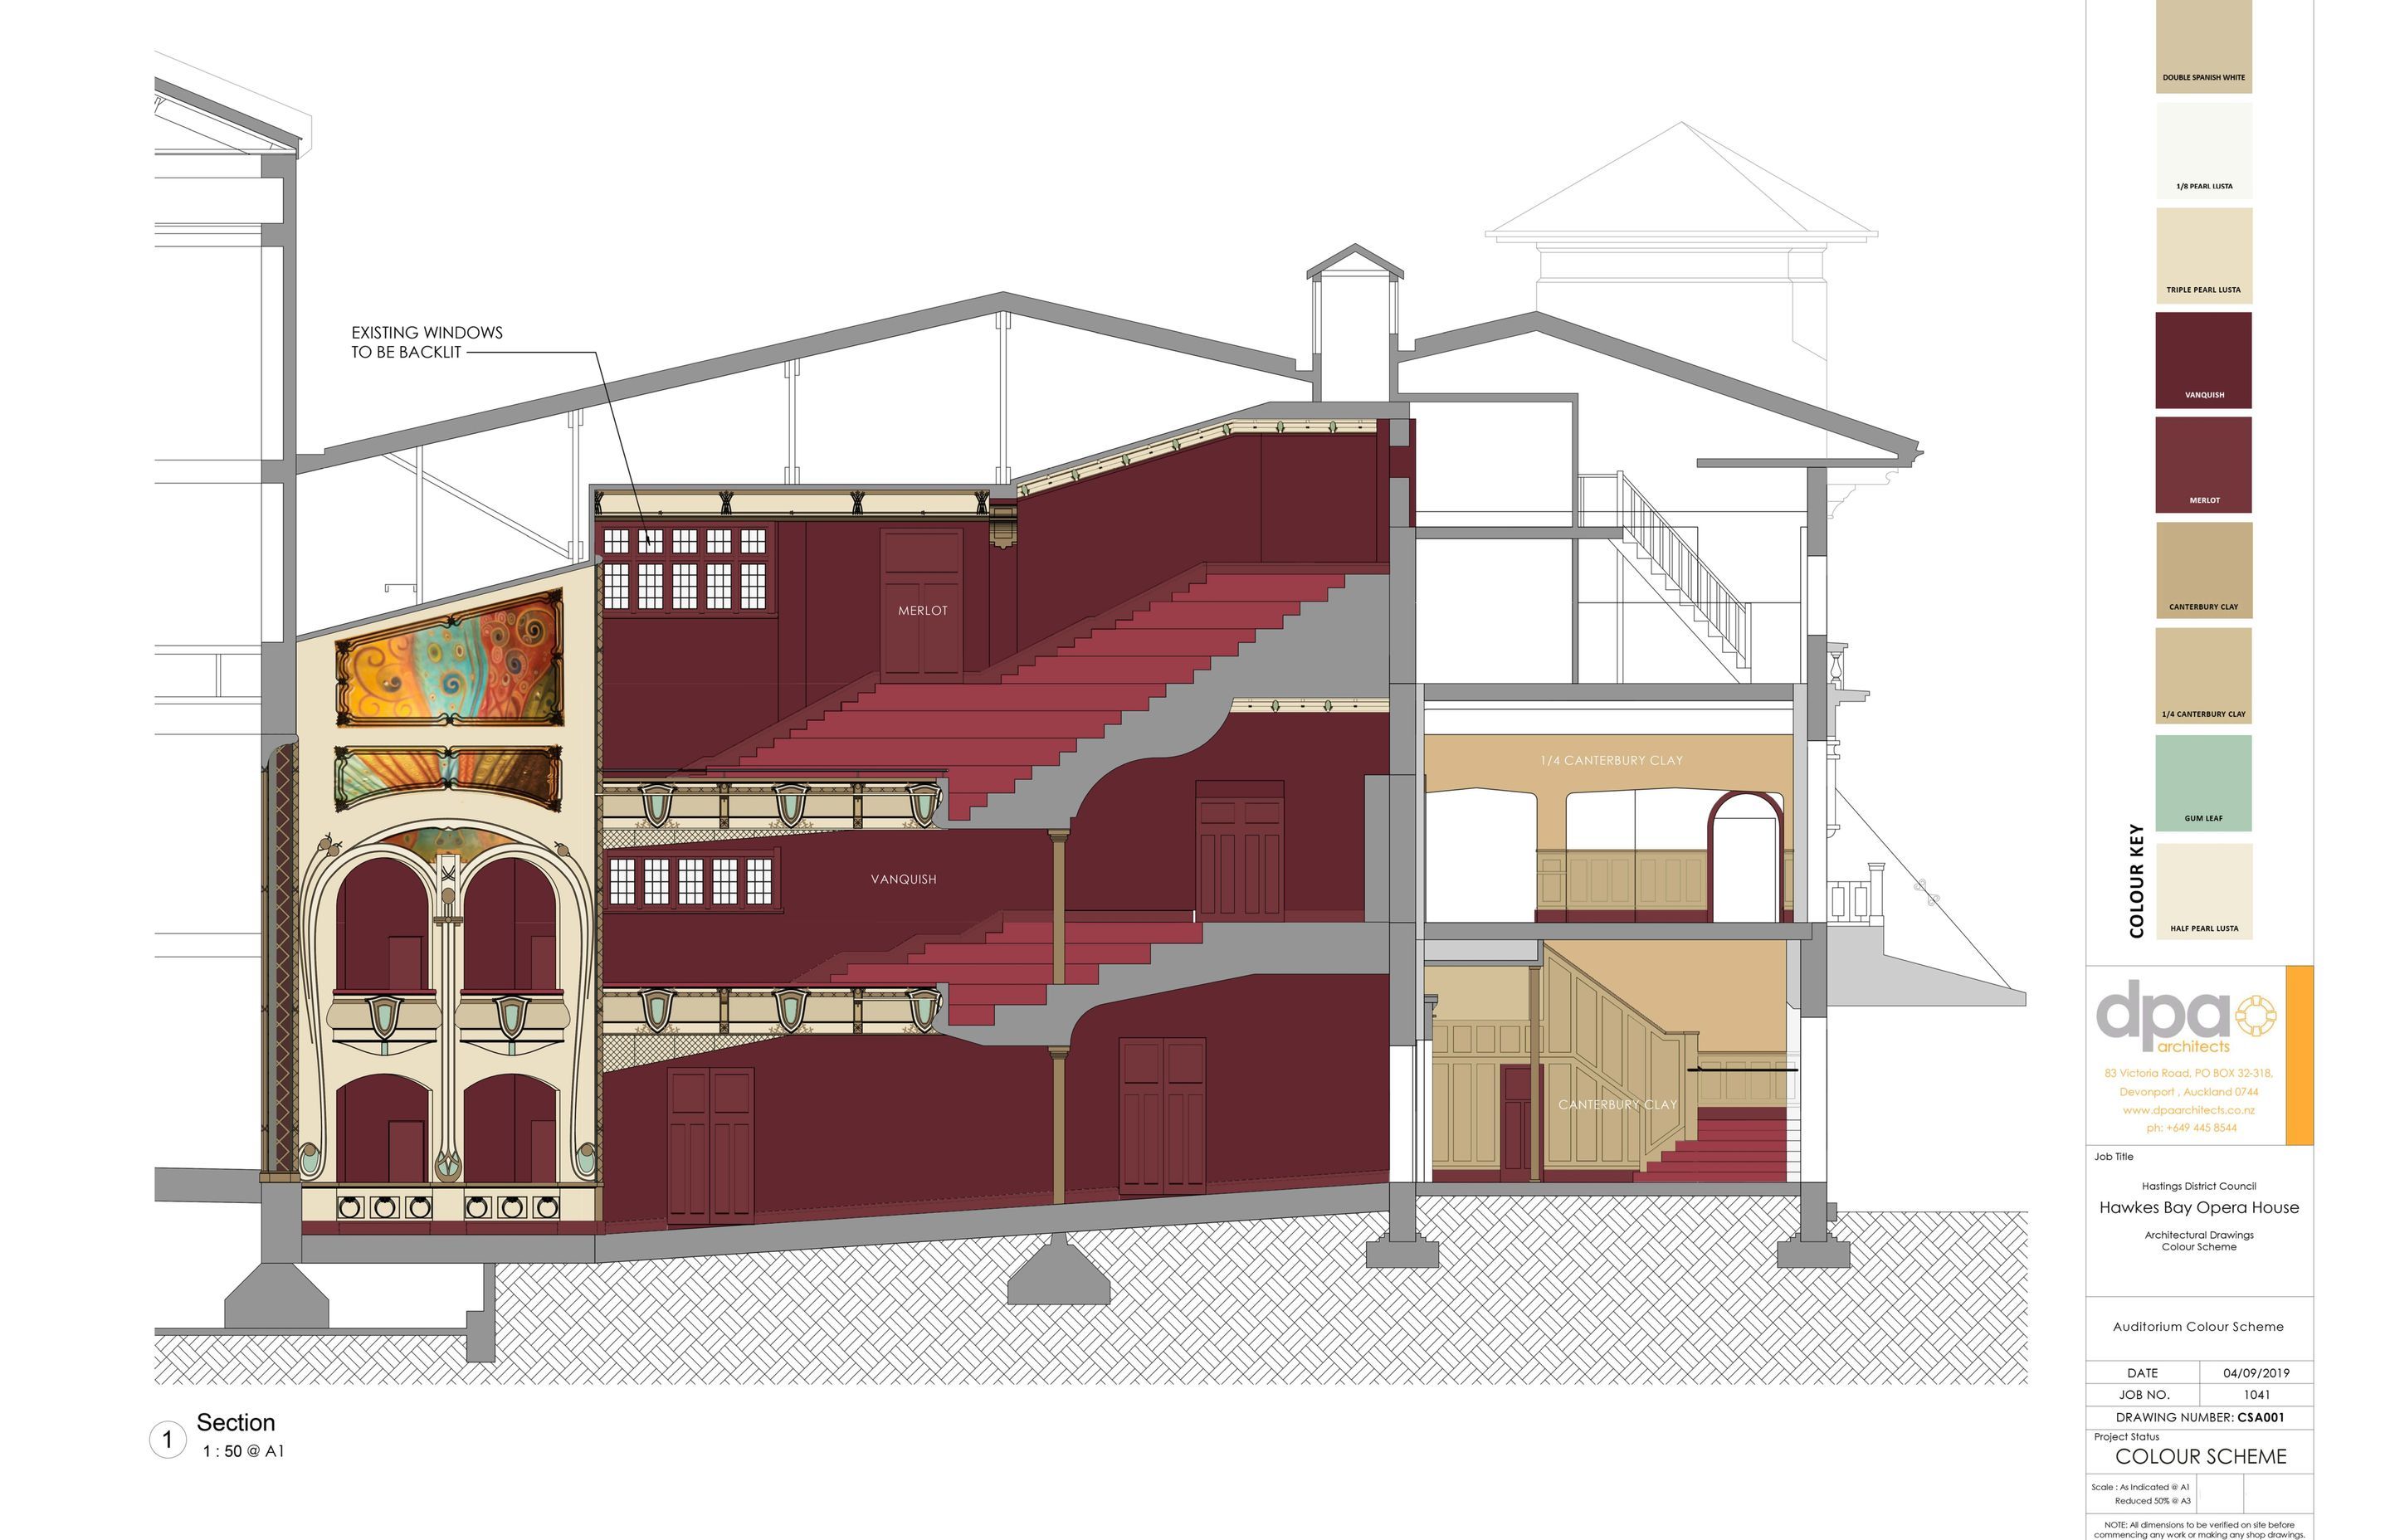 DPA Architects' drawings showing the proposed new colour scheme and the existing auditorium mural ceiling.